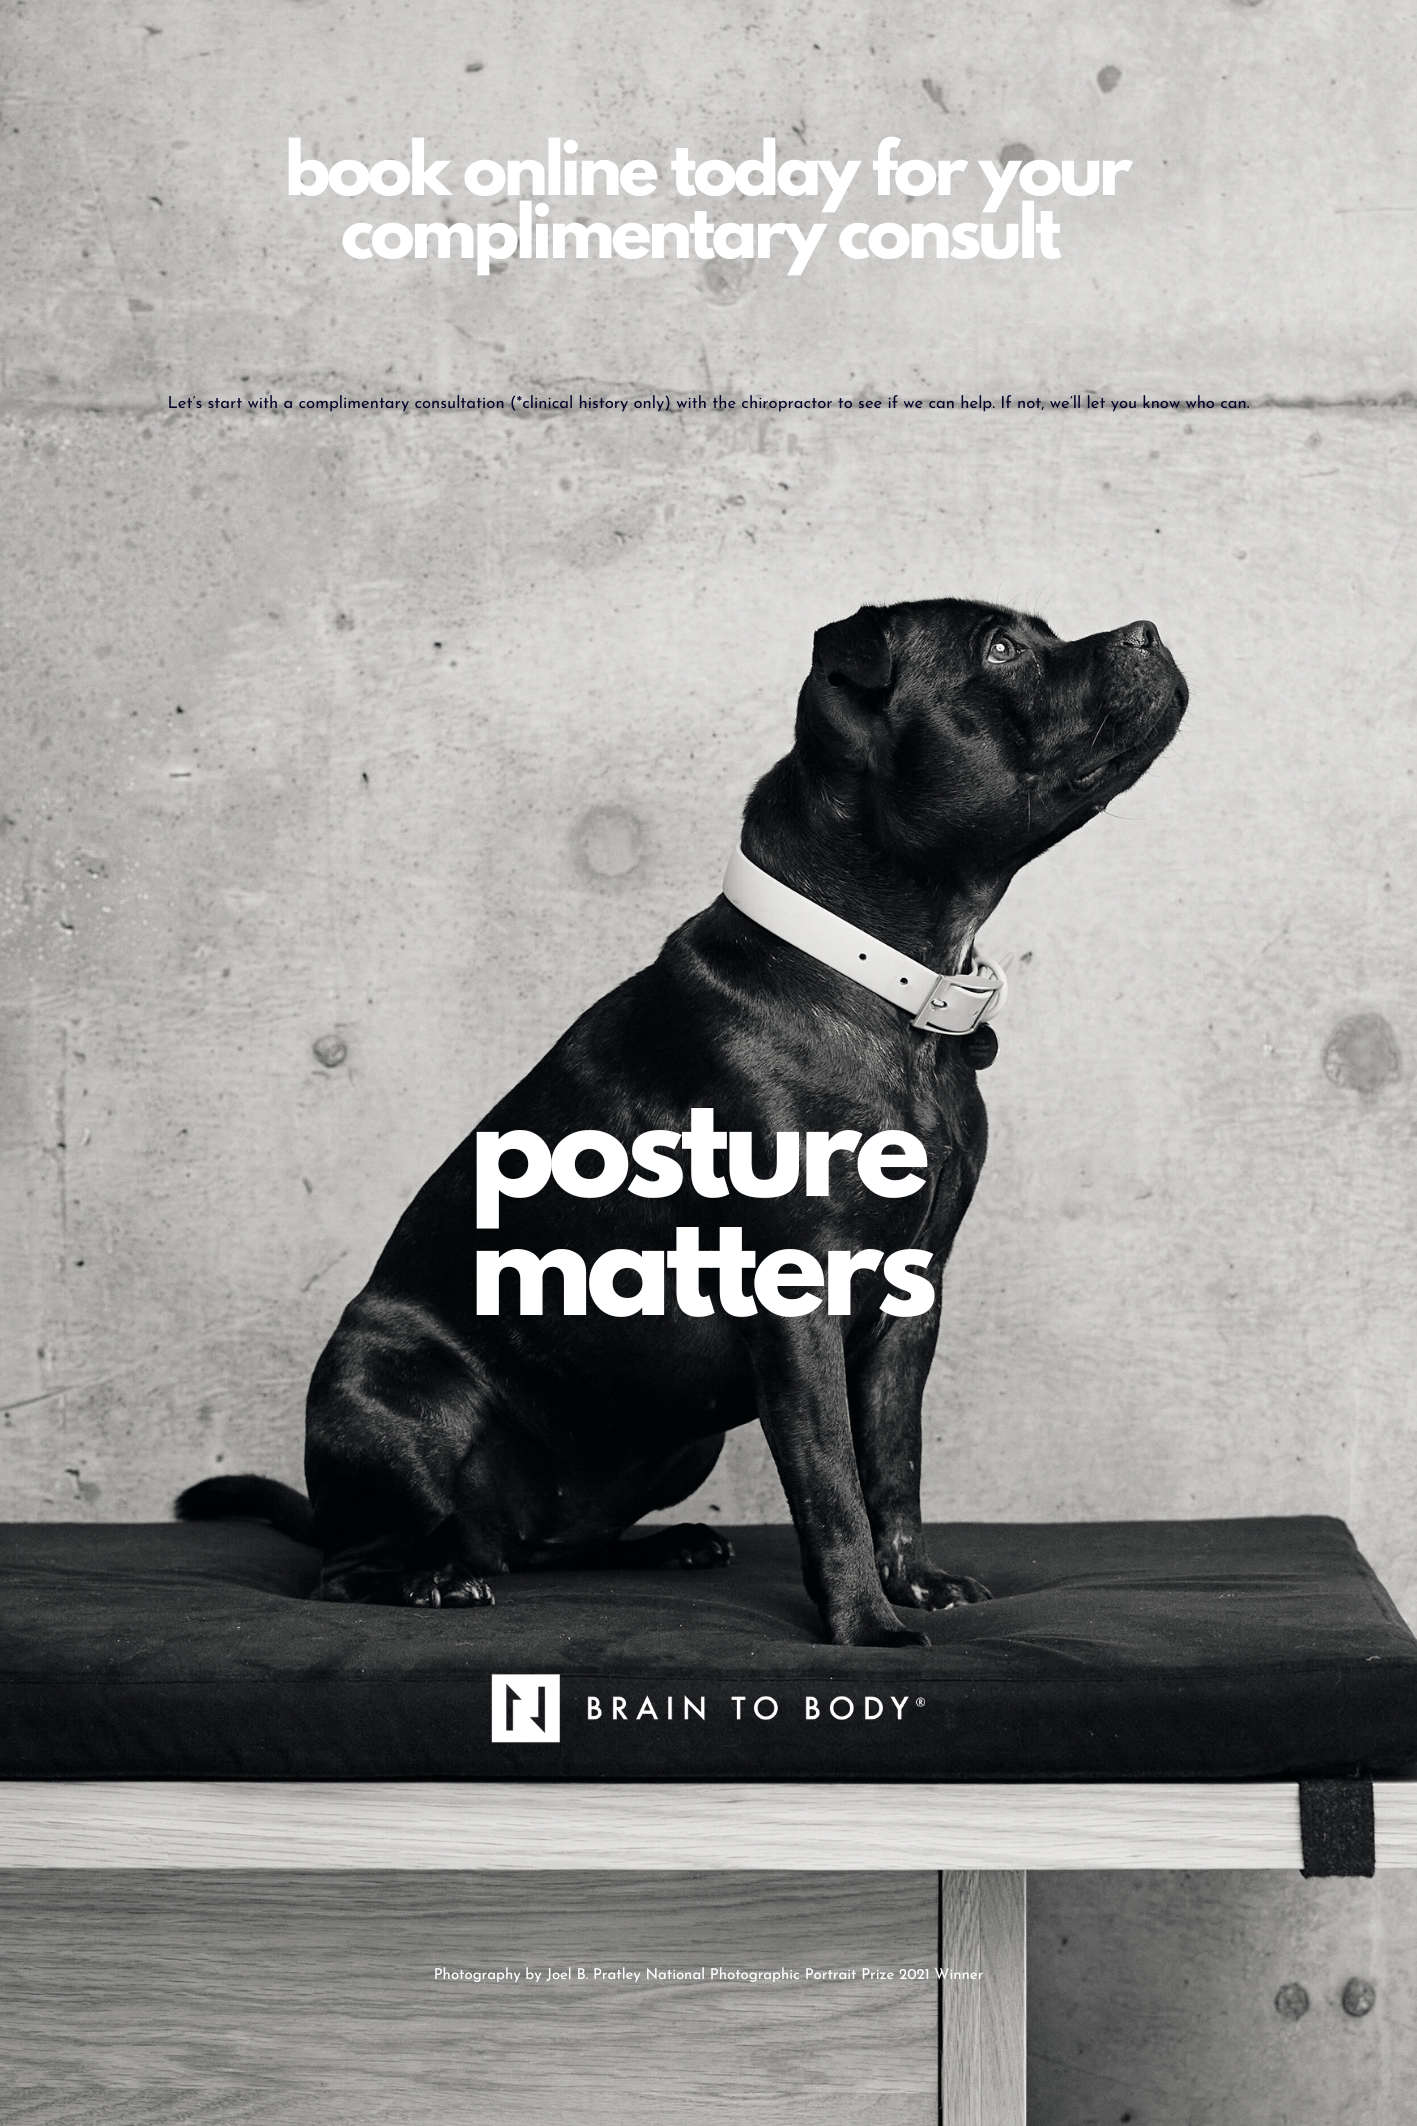 Posture matters Complimentary Consult.png